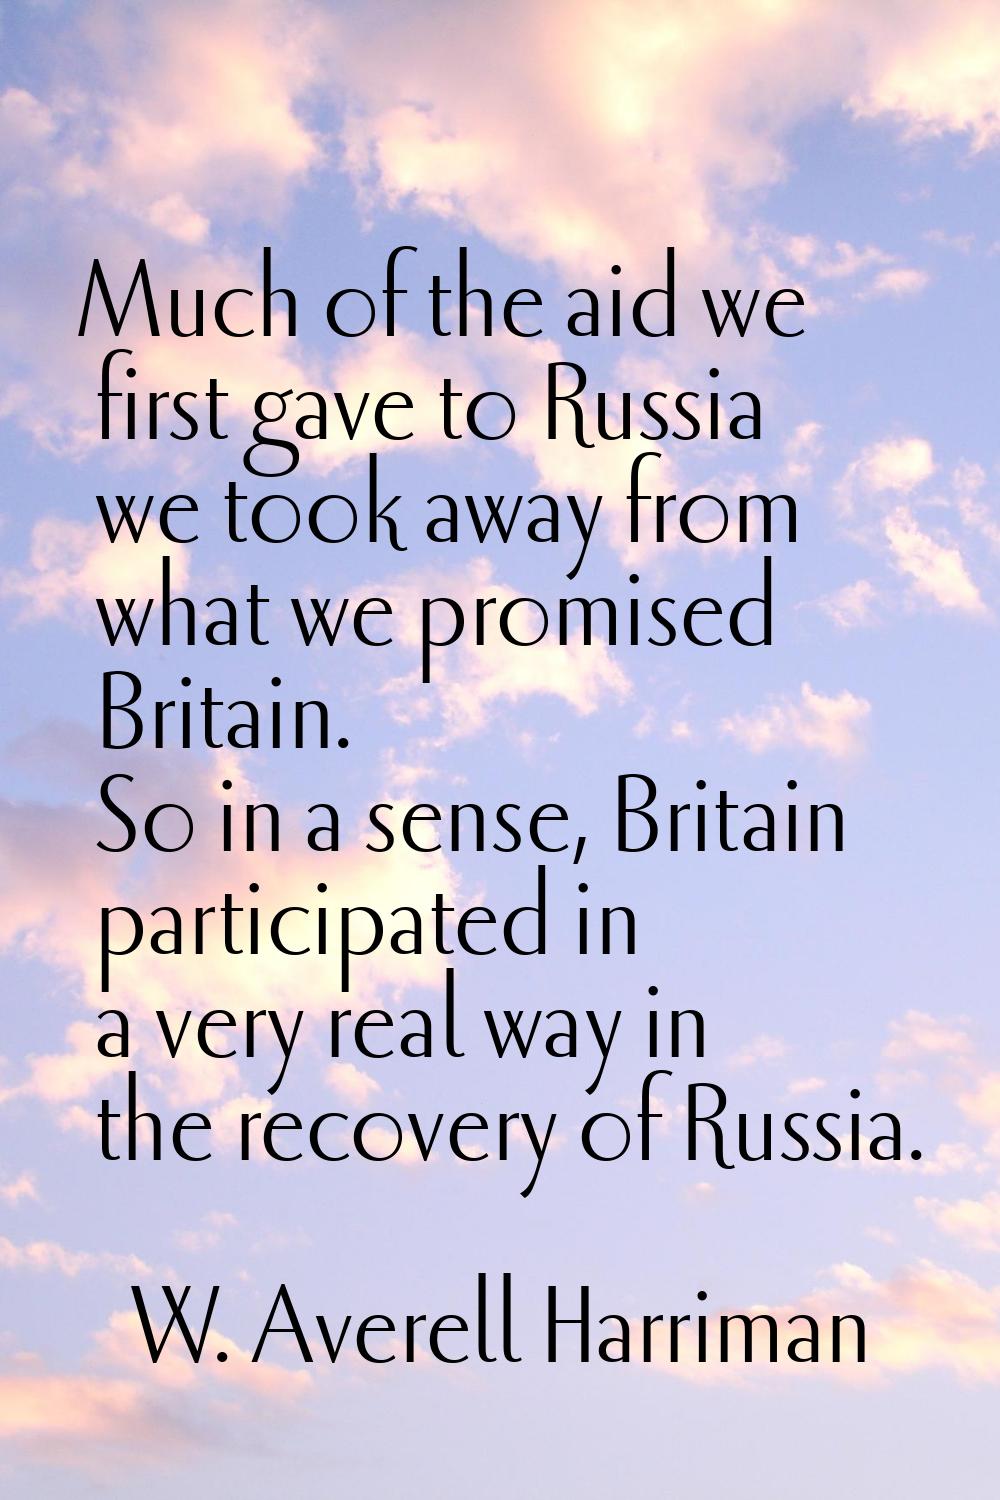 Much of the aid we first gave to Russia we took away from what we promised Britain. So in a sense, 